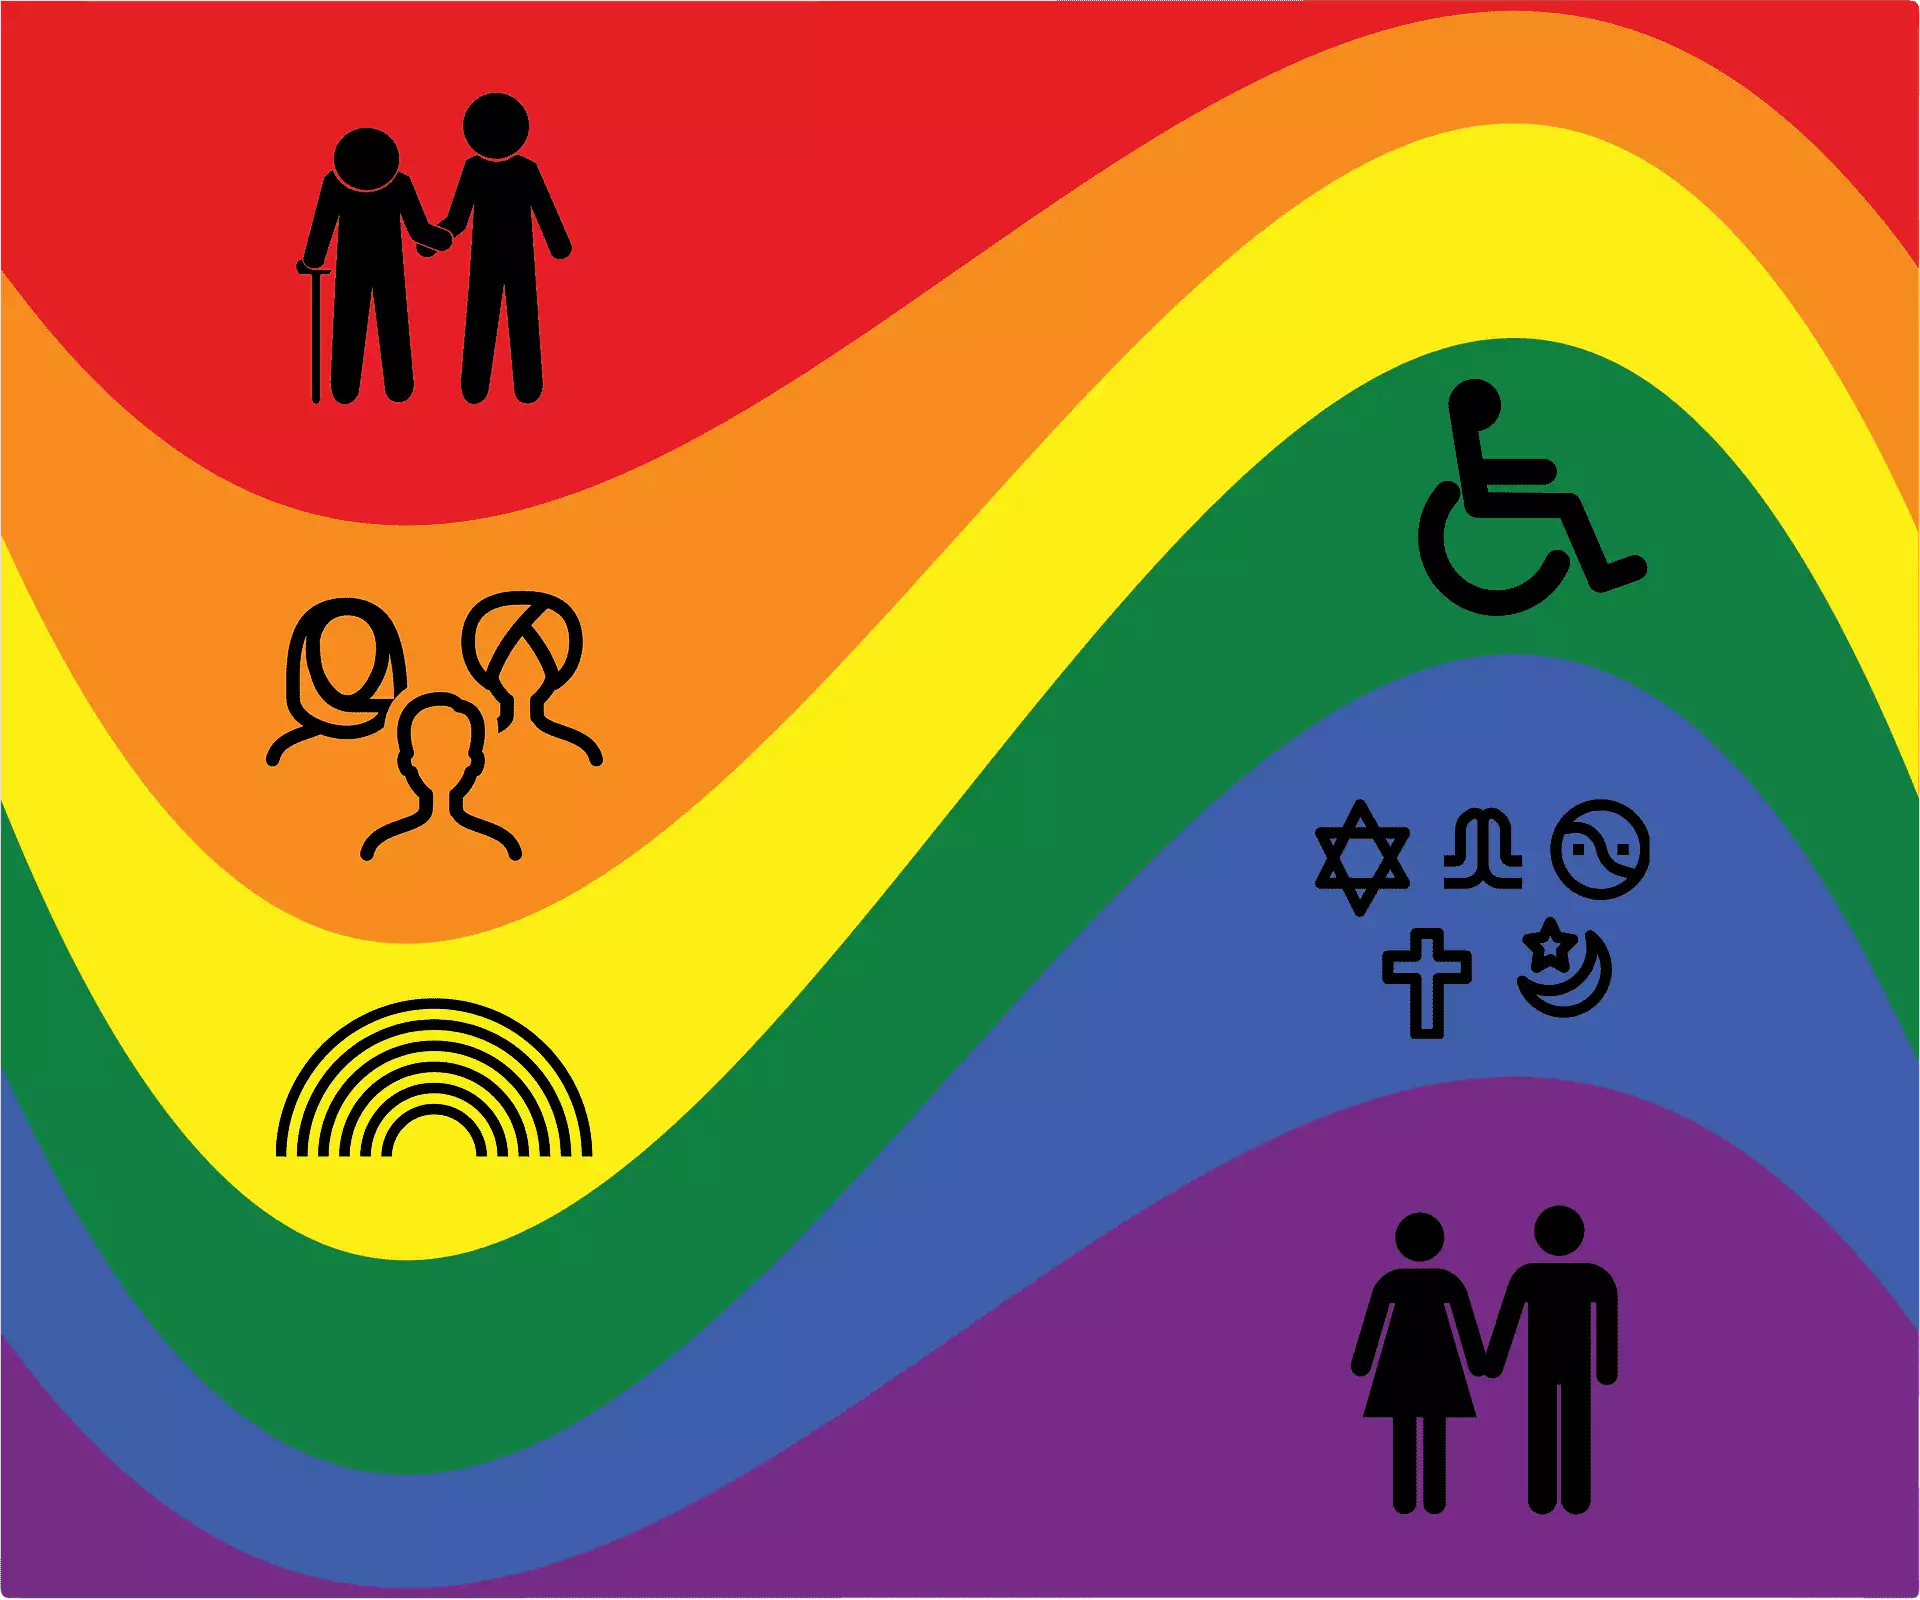 inclusion and diversity of all groups regardless of race, sex, gender and identity